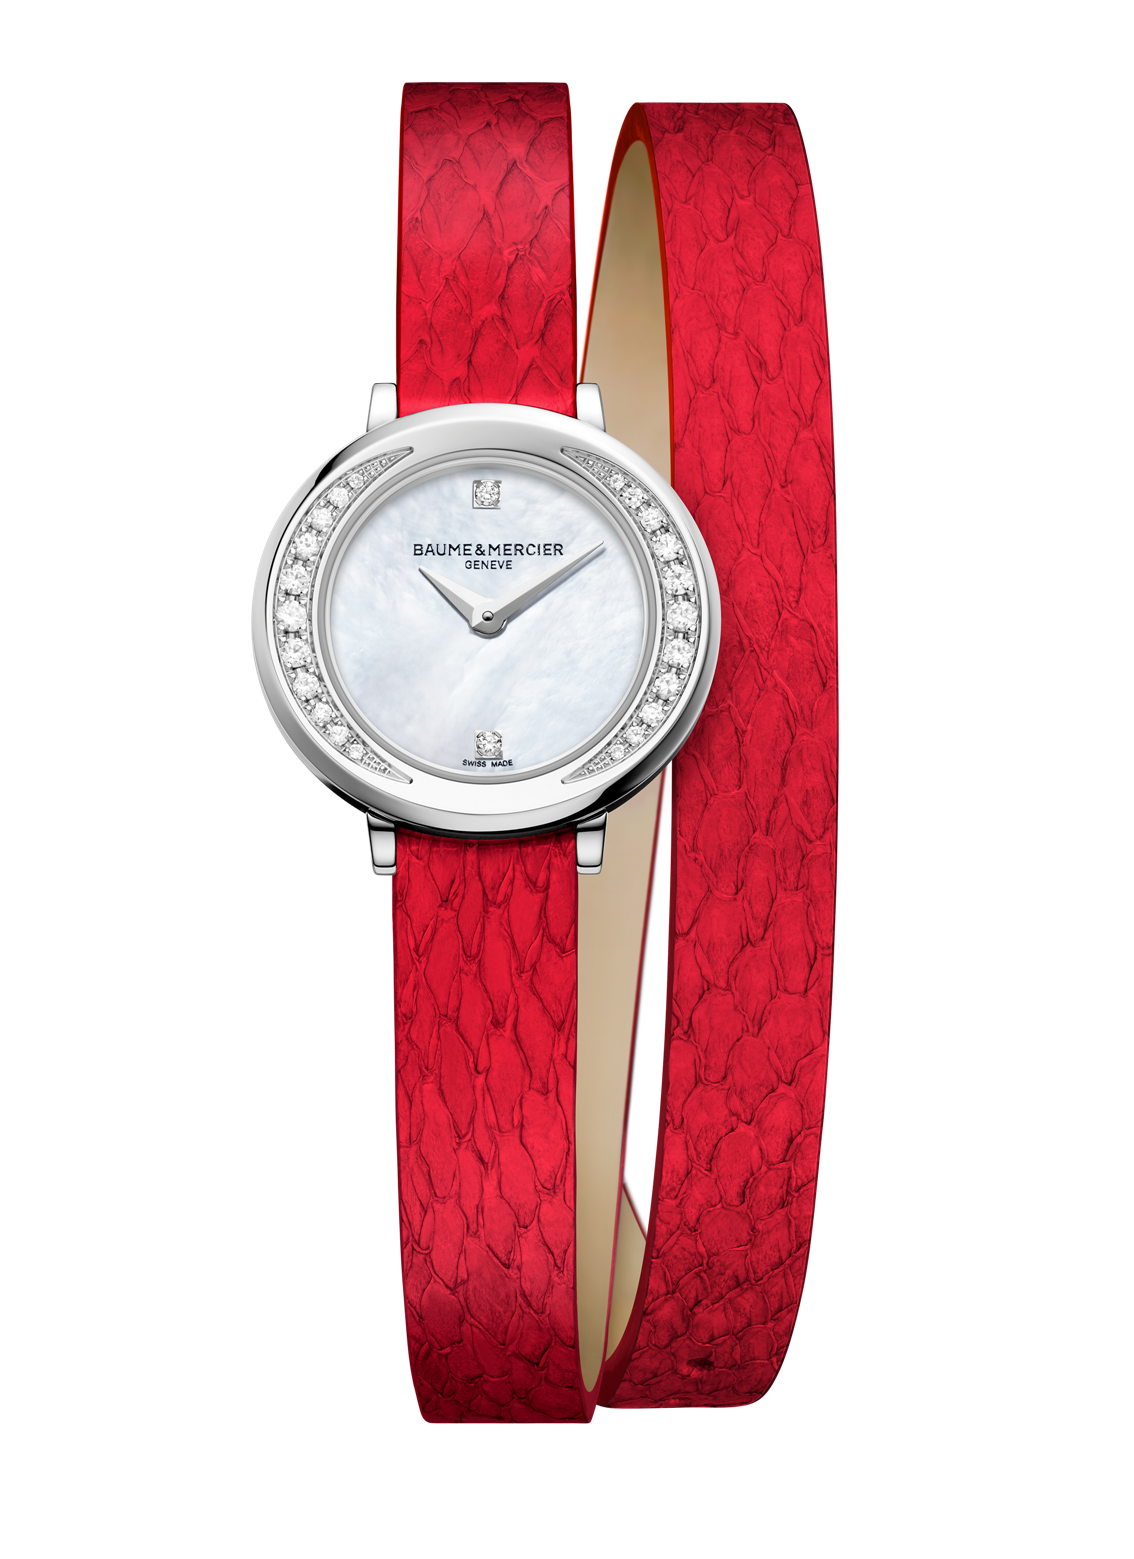 Baume & Mercier: A leather with a promising future for Petite Promesse ...